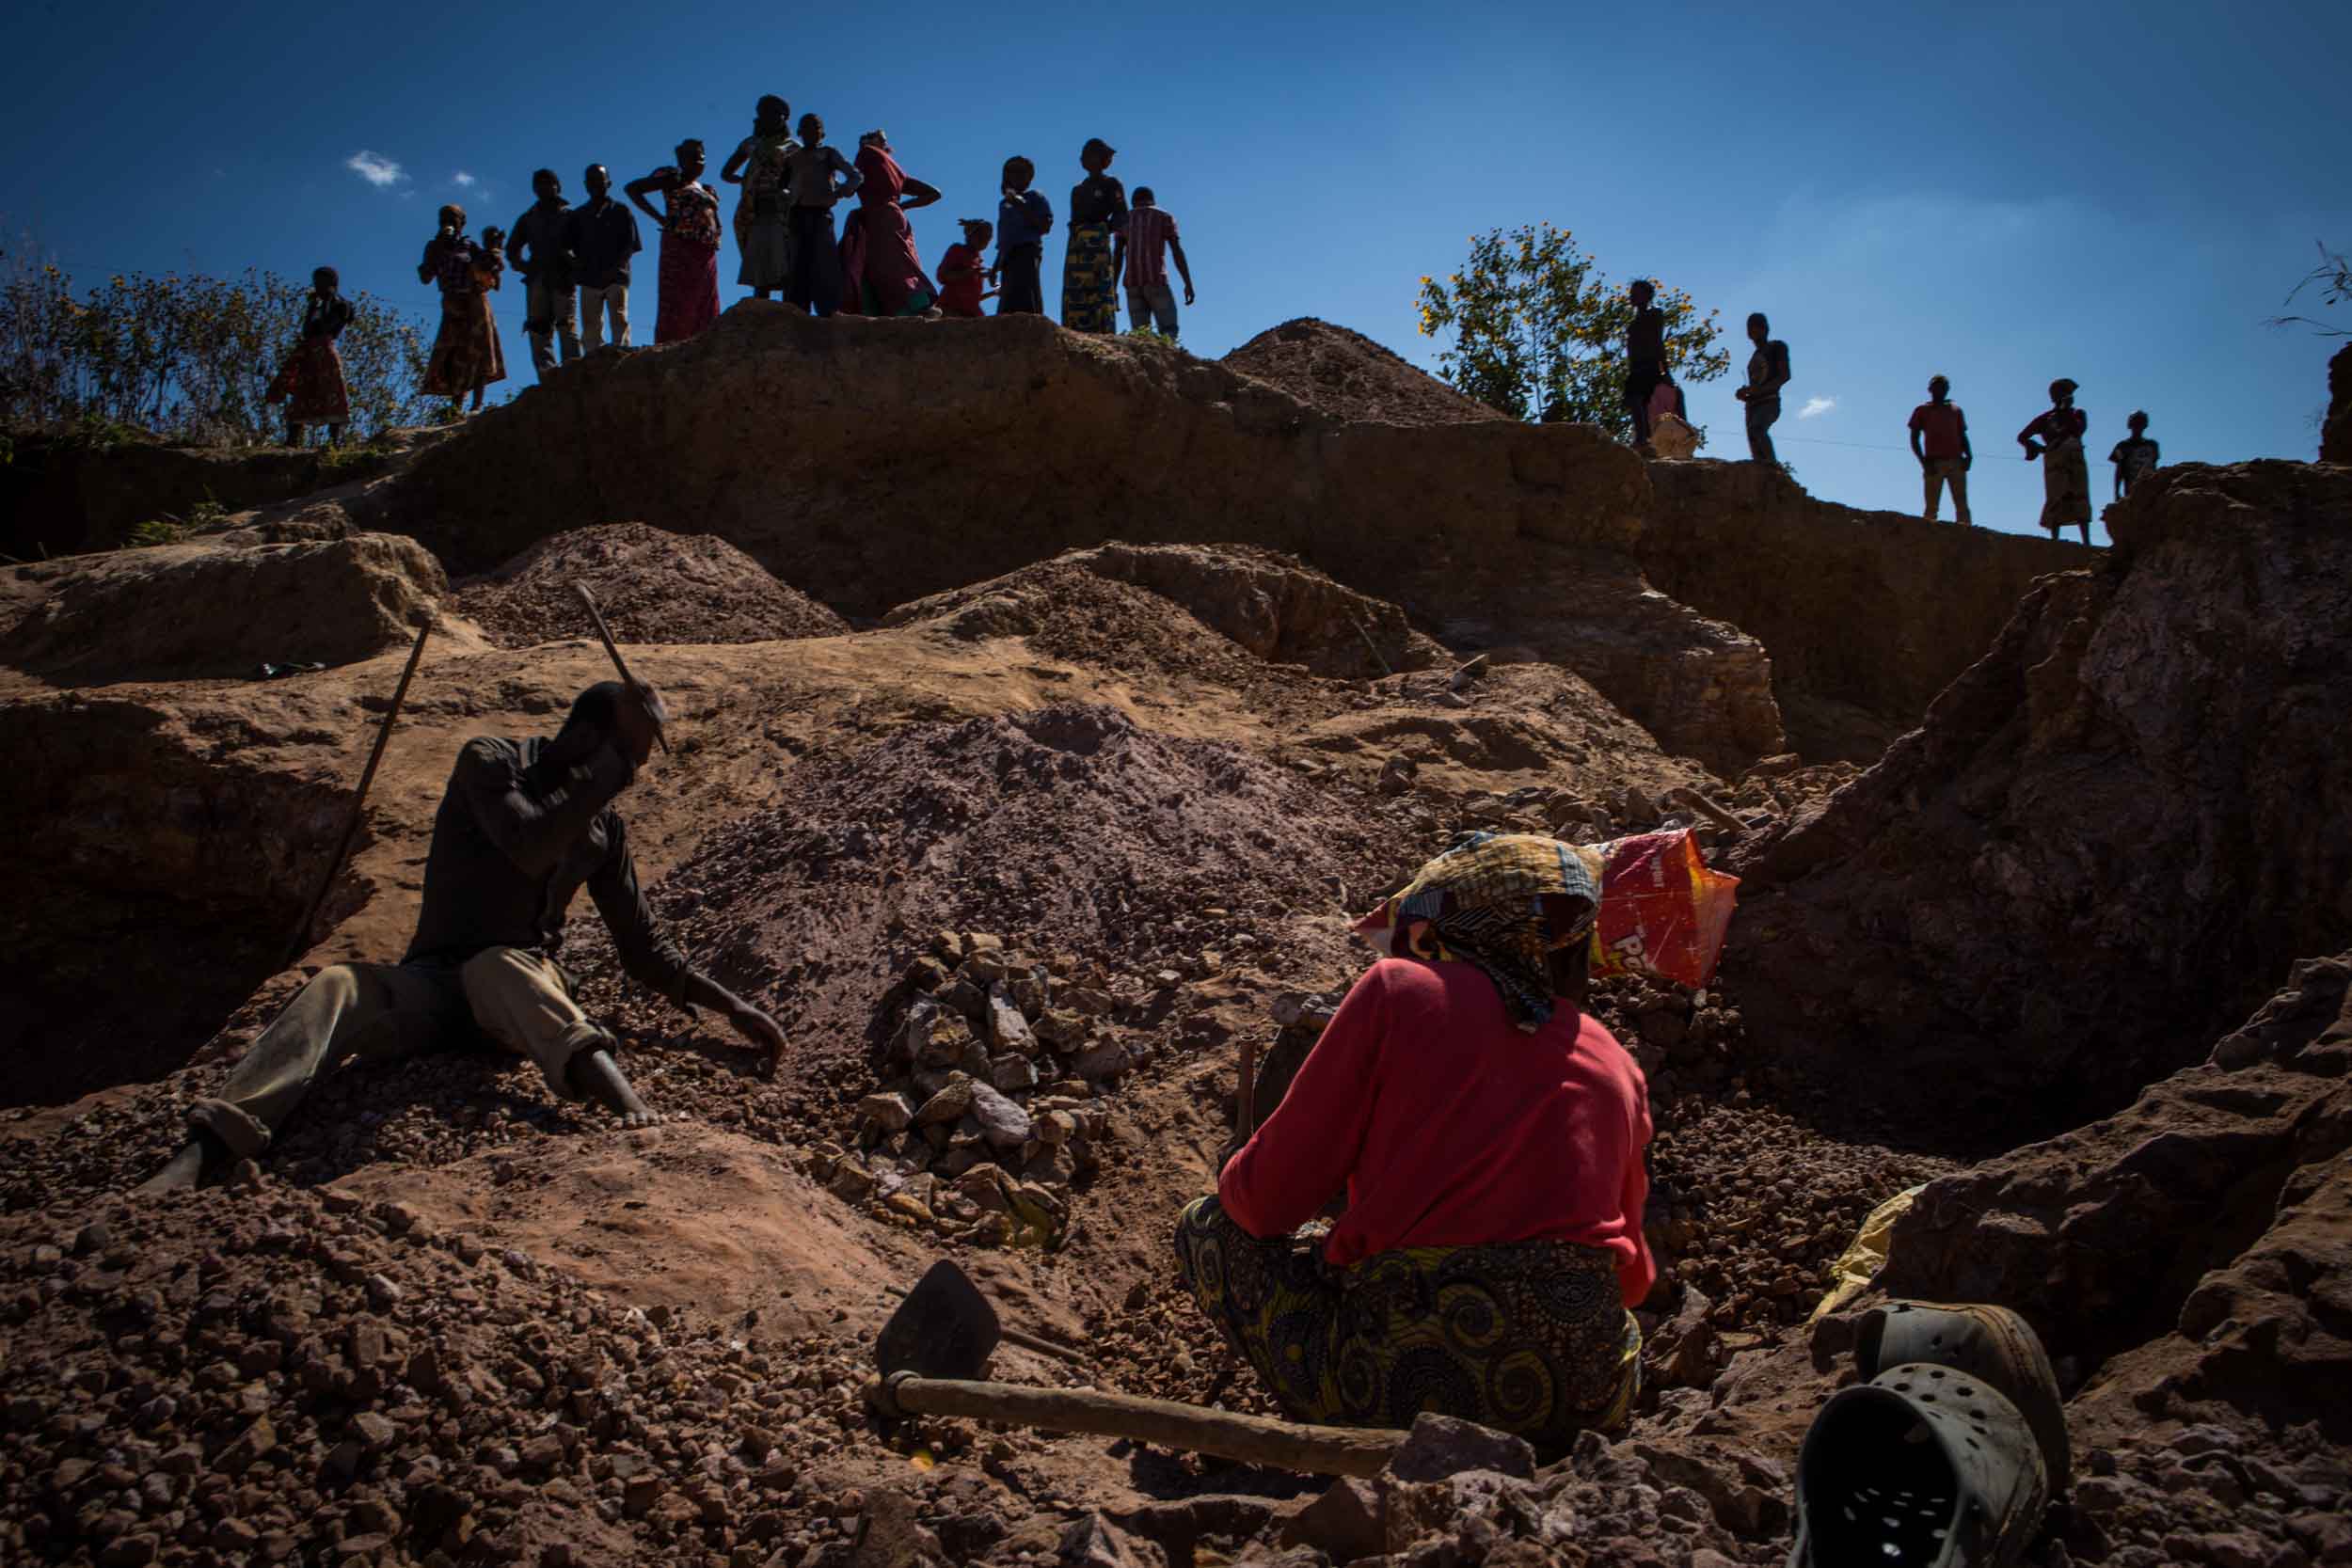  Diggers are working on the road between Lubumbashi and Kipushi. They are breaking stones, which they sell for construction. Sometimes they find a cobalt vein 